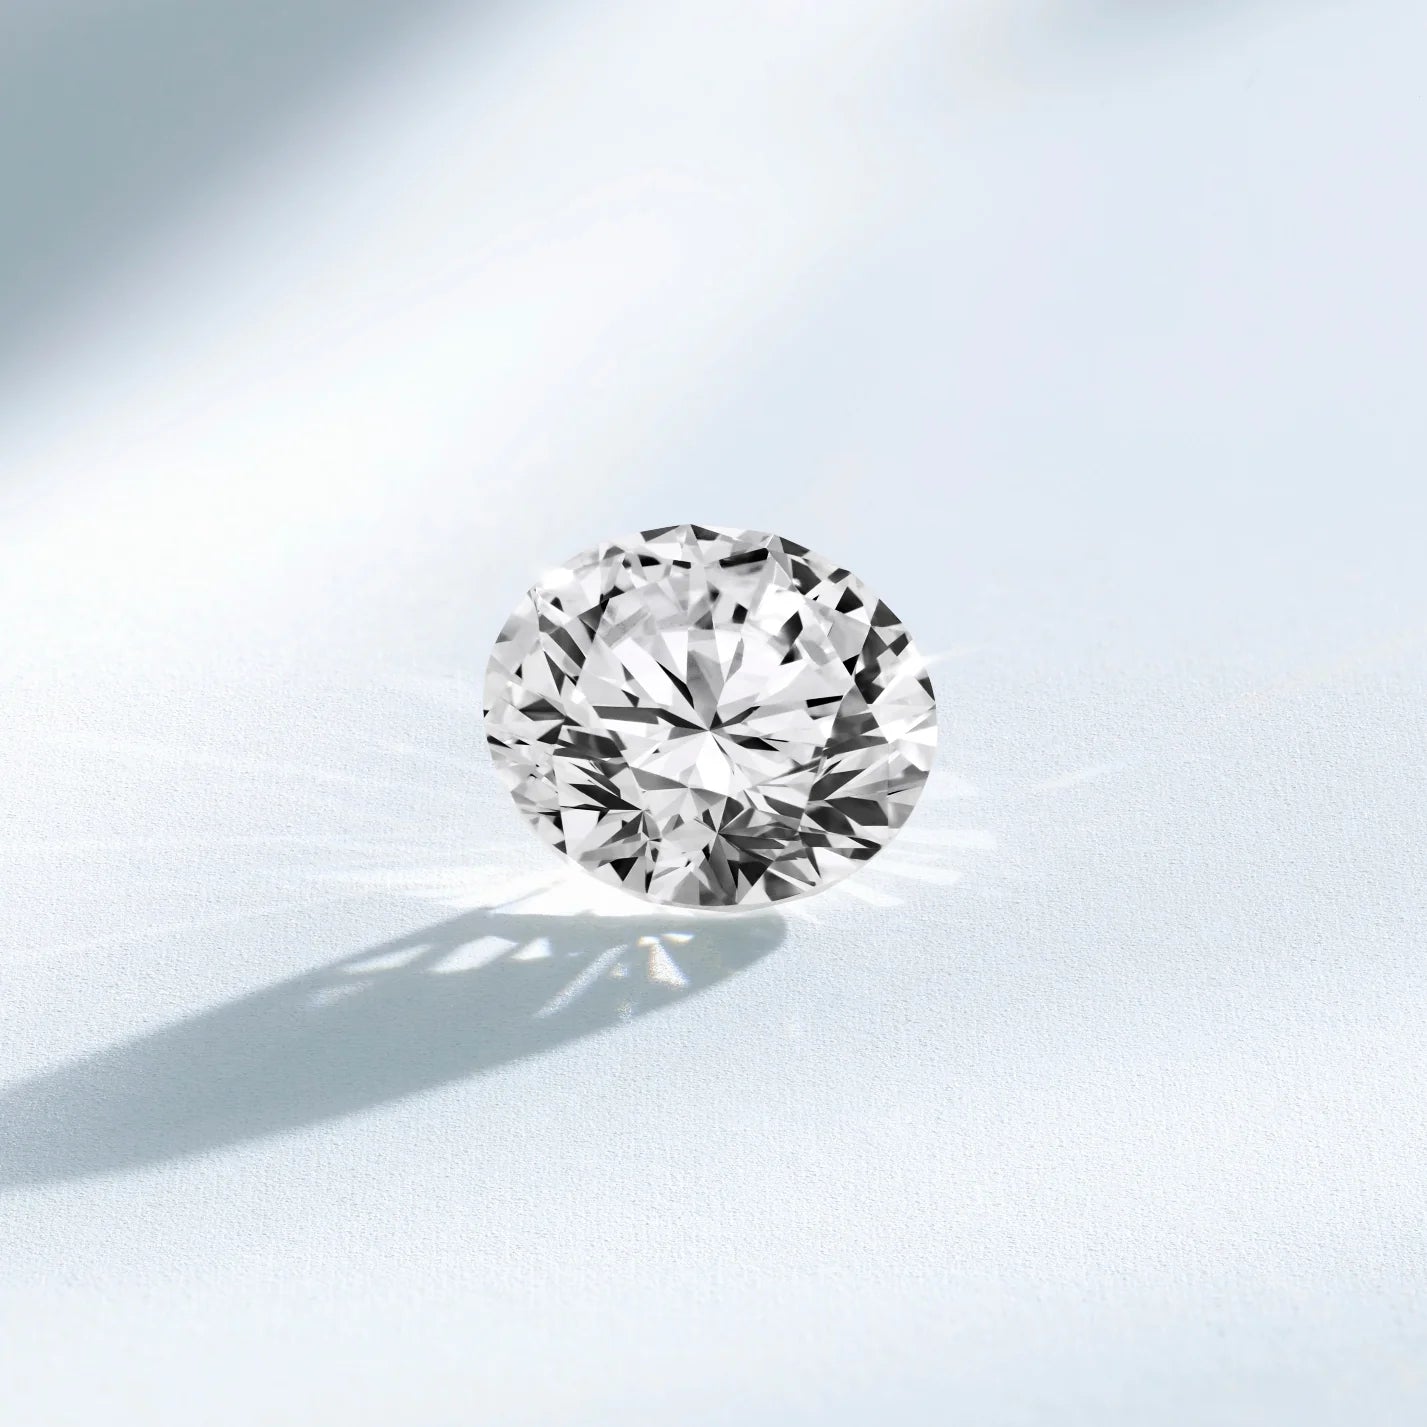 unveiling the science behind lab-grown diamonds: transforming the jewelry industry